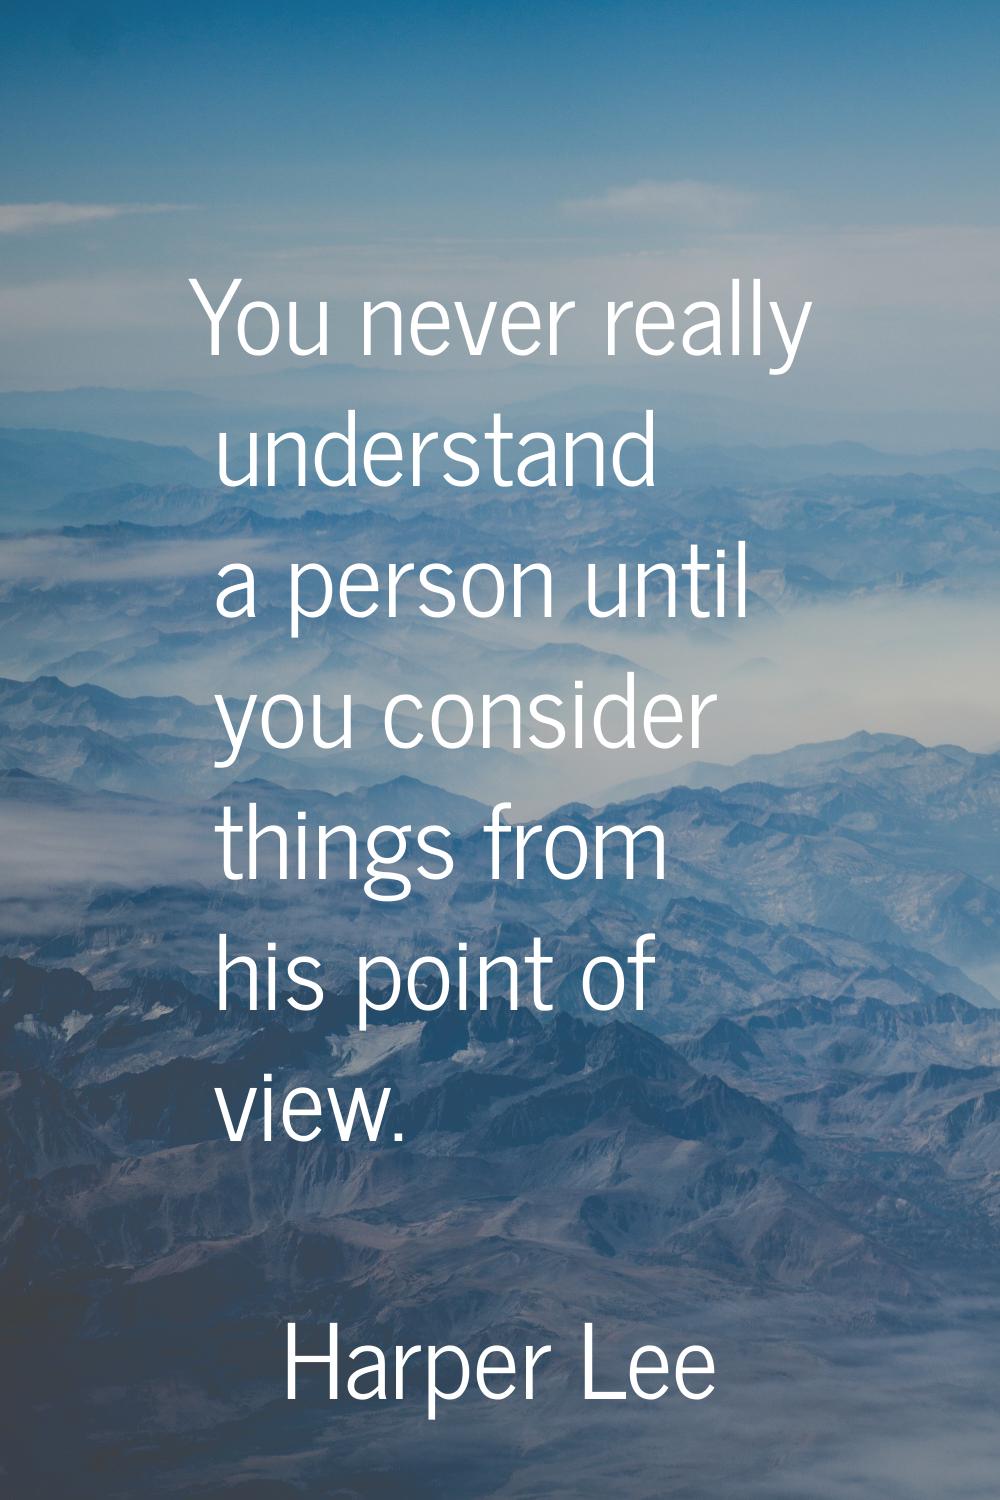 You never really understand a person until you consider things from his point of view.